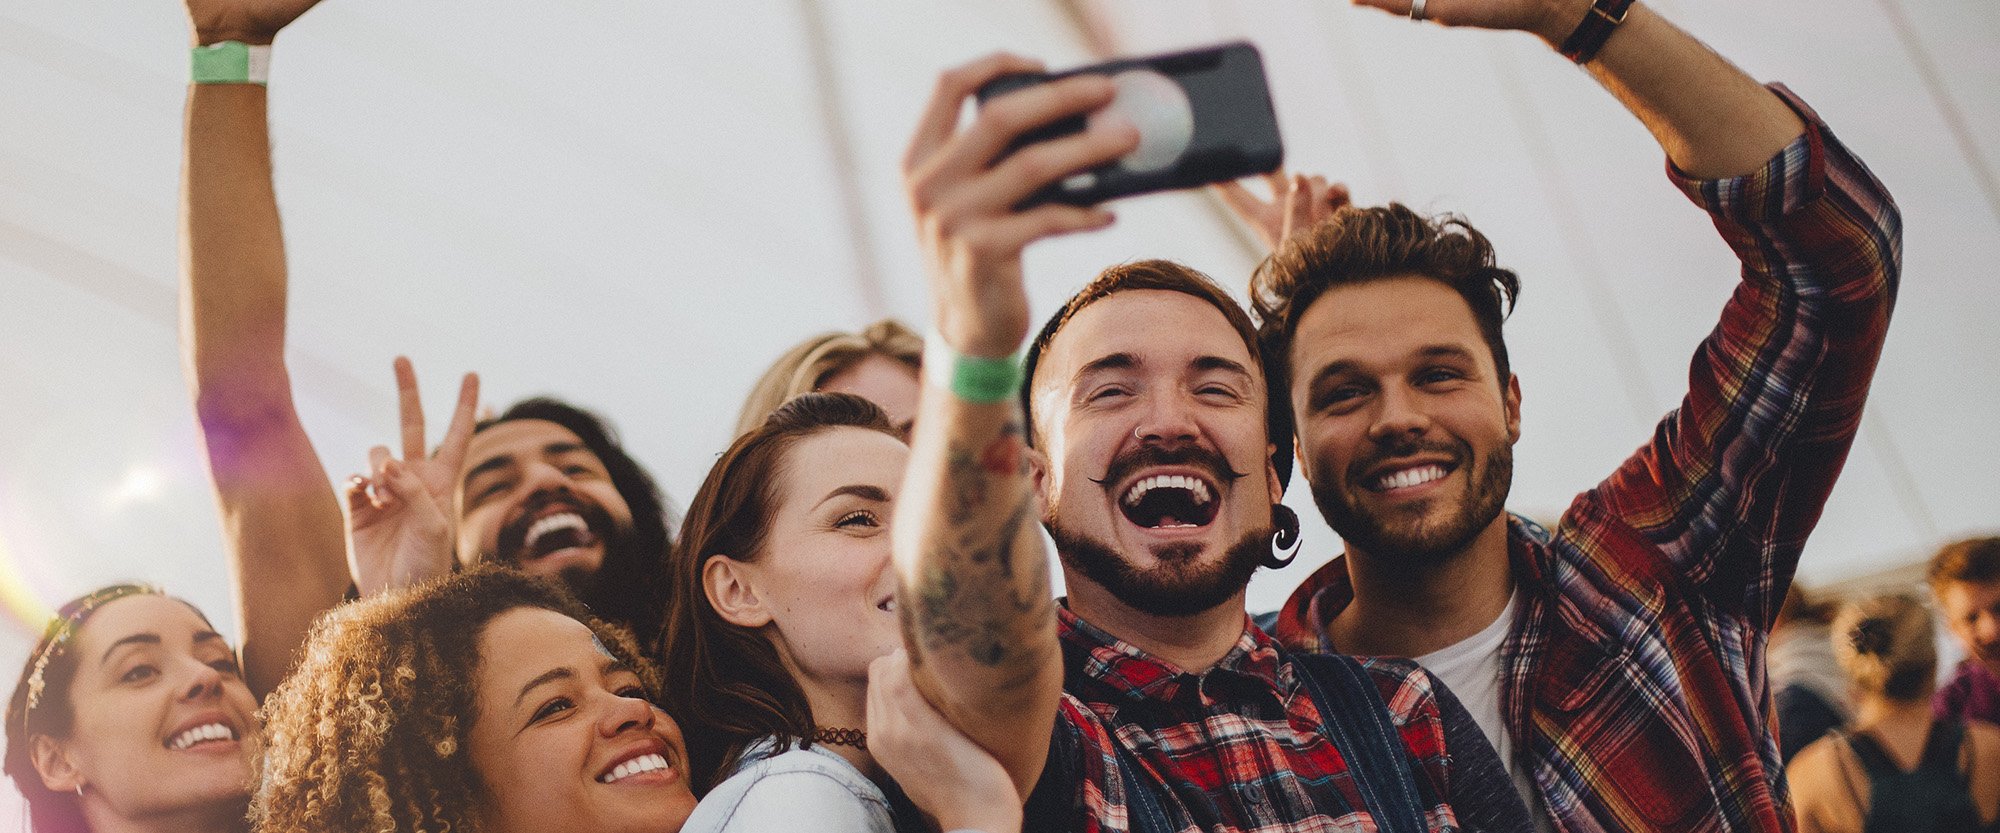 Group of young adult friends are taking a group selfie on a smartphone while they are at a festival looking for social media data